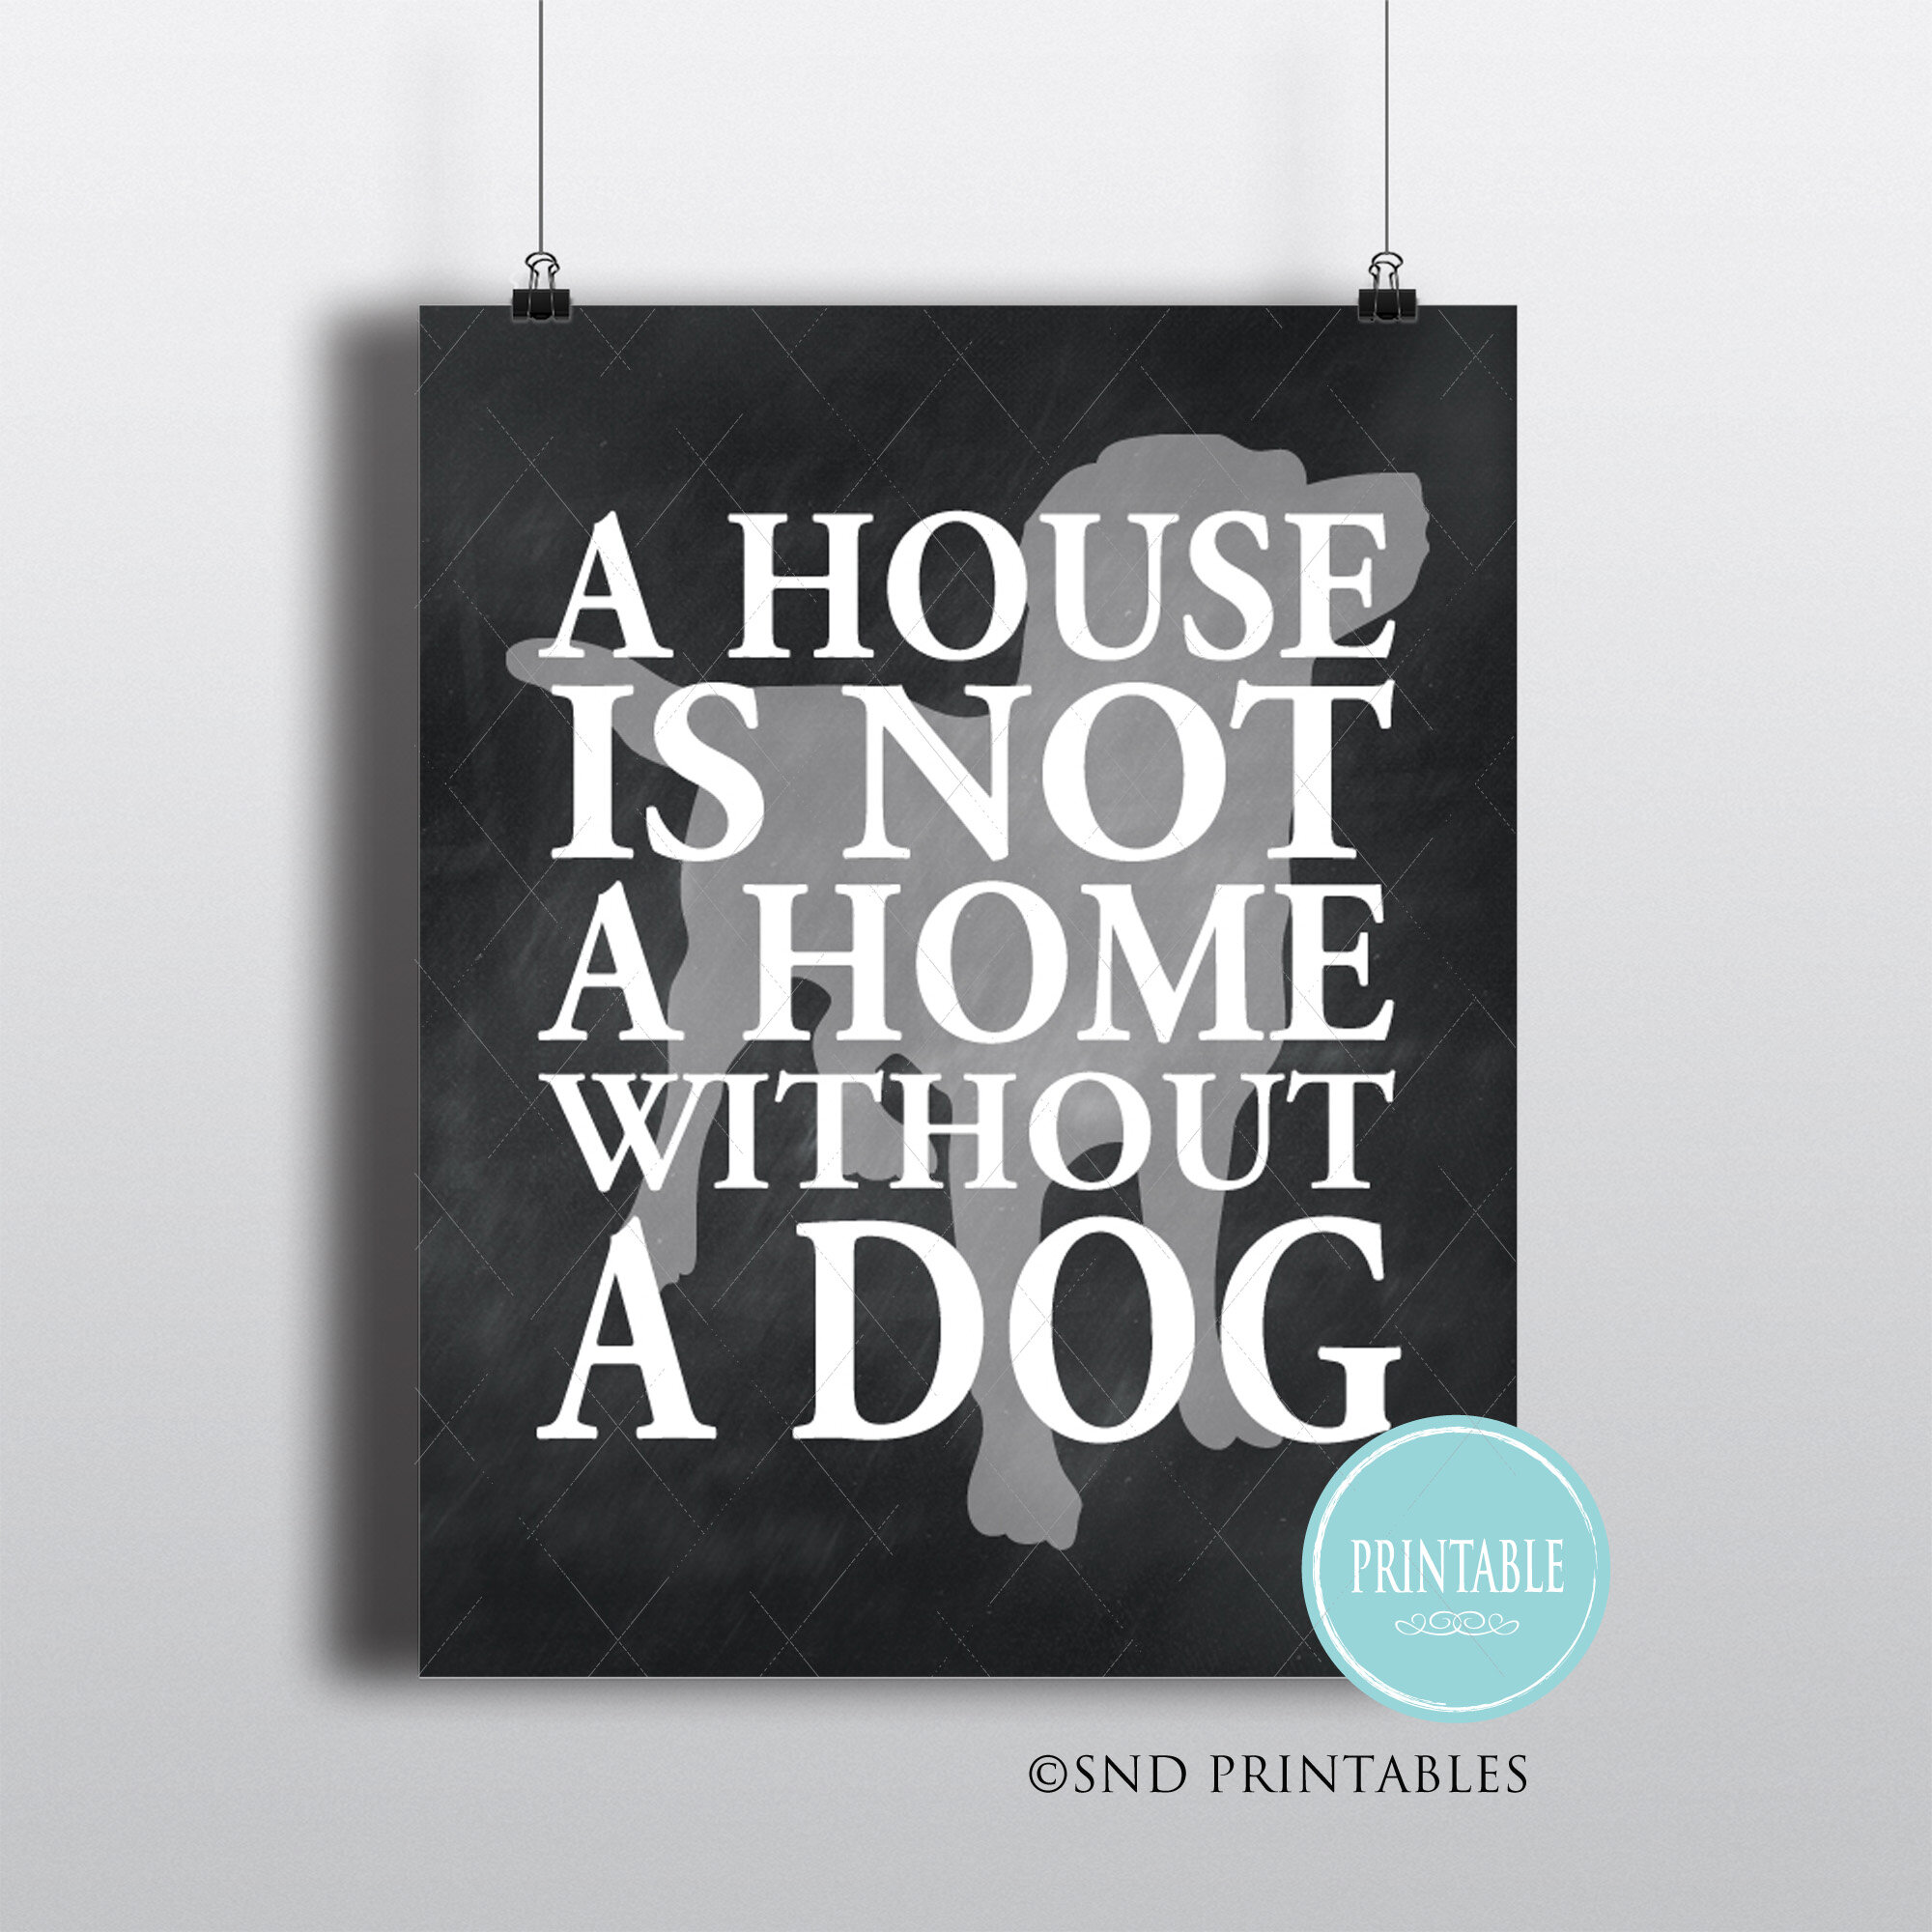 A house is not a house